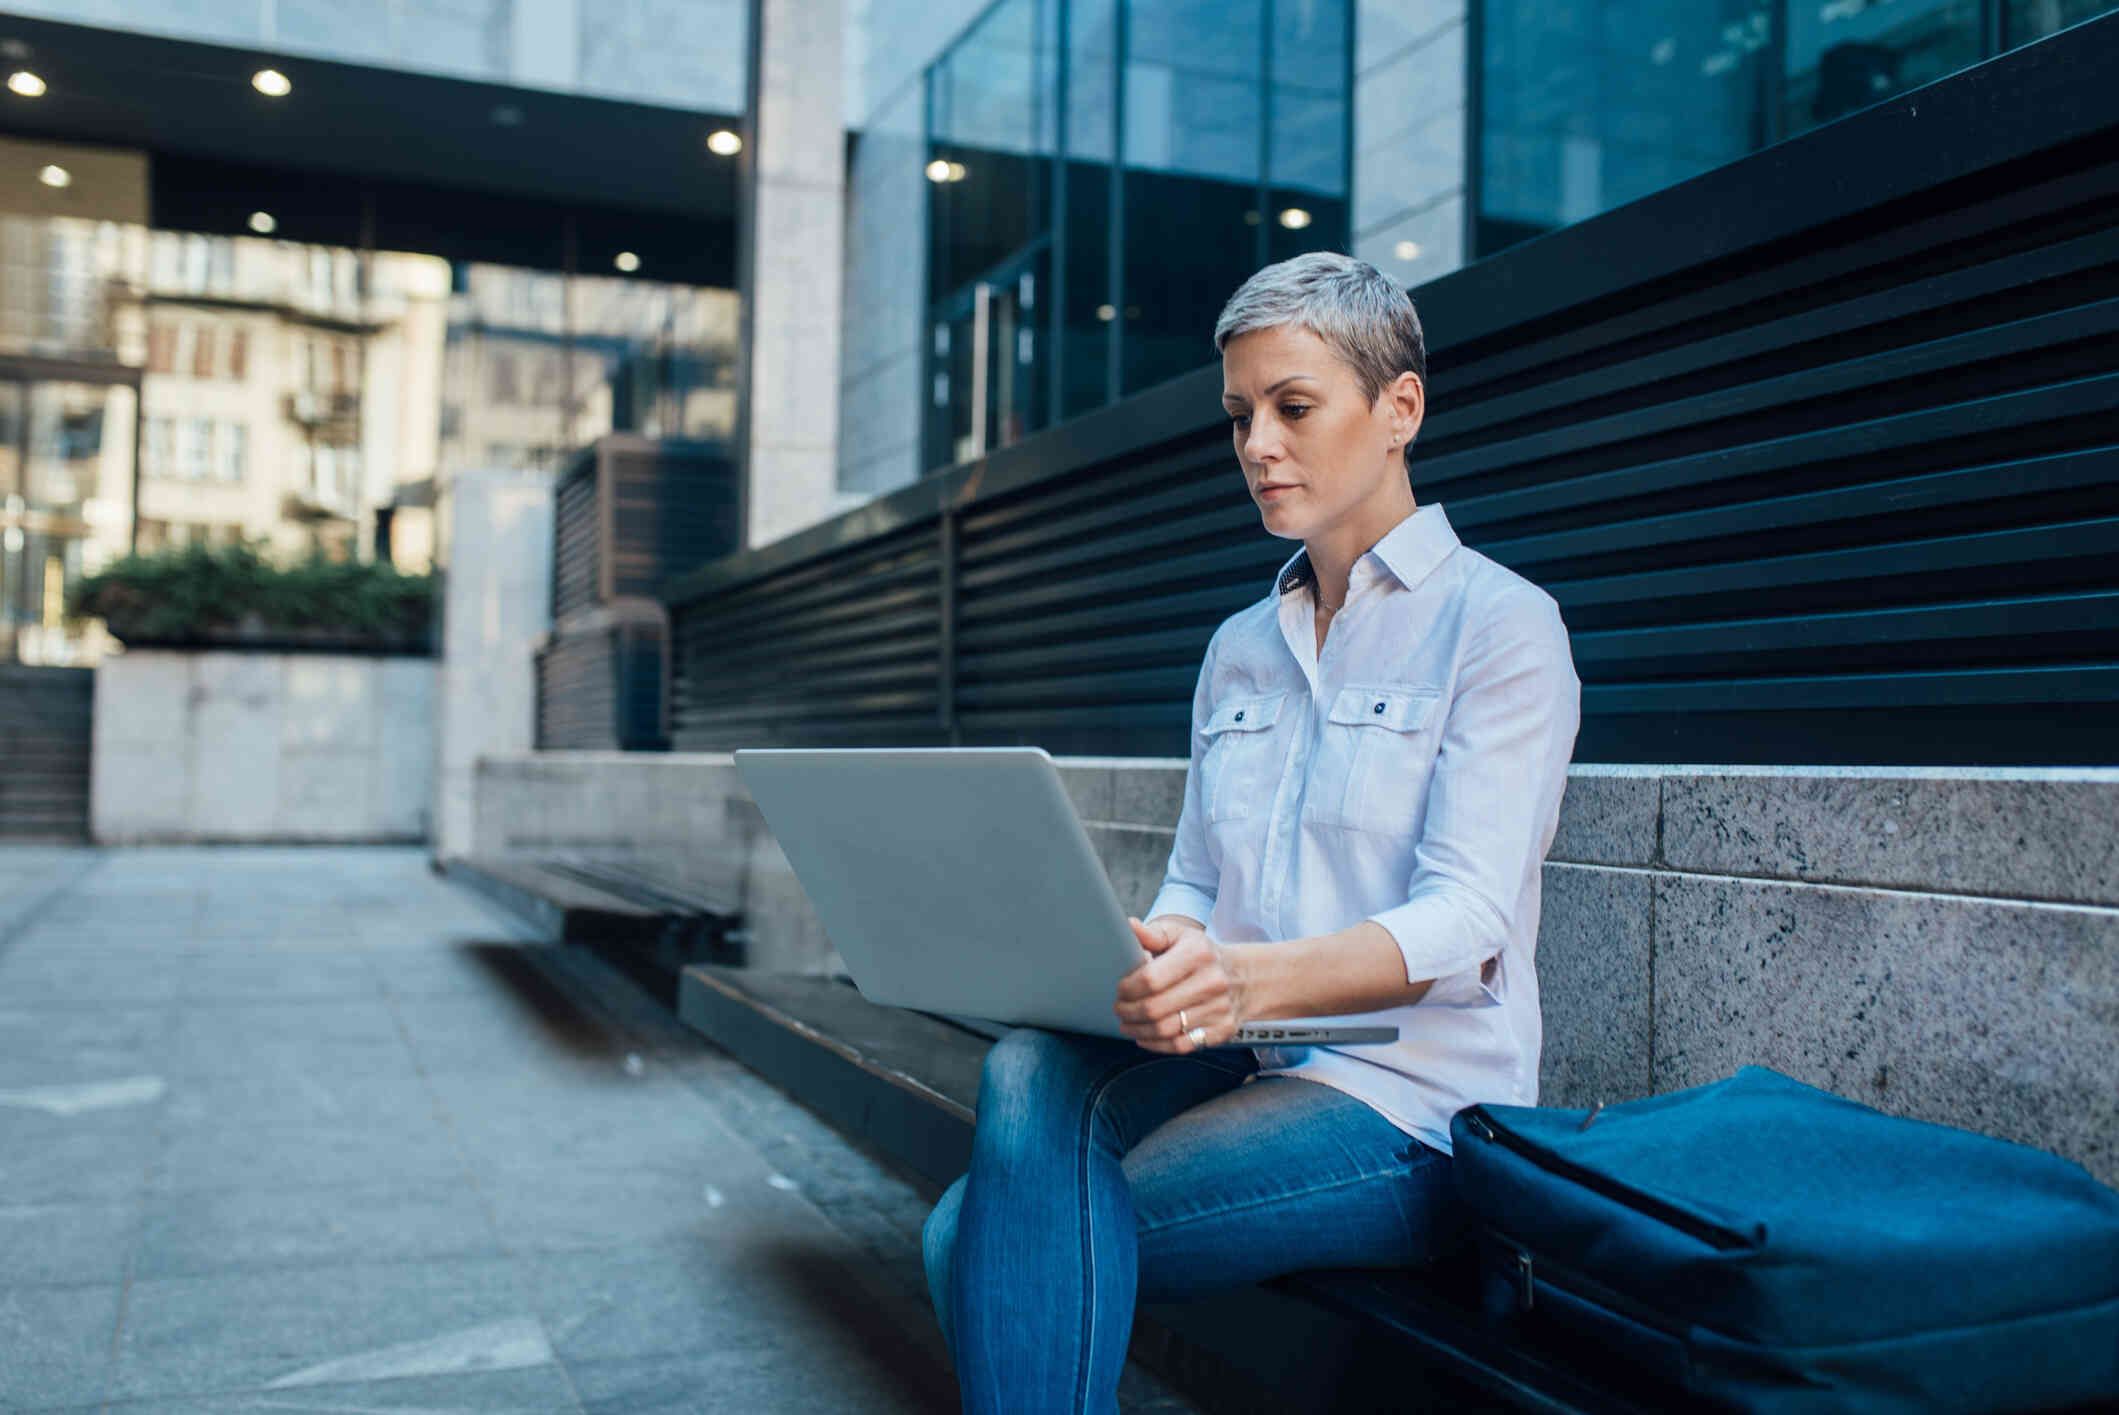 A woman in a white shirt sits on a bench outside of a  large building and types on the laptop in her lap.